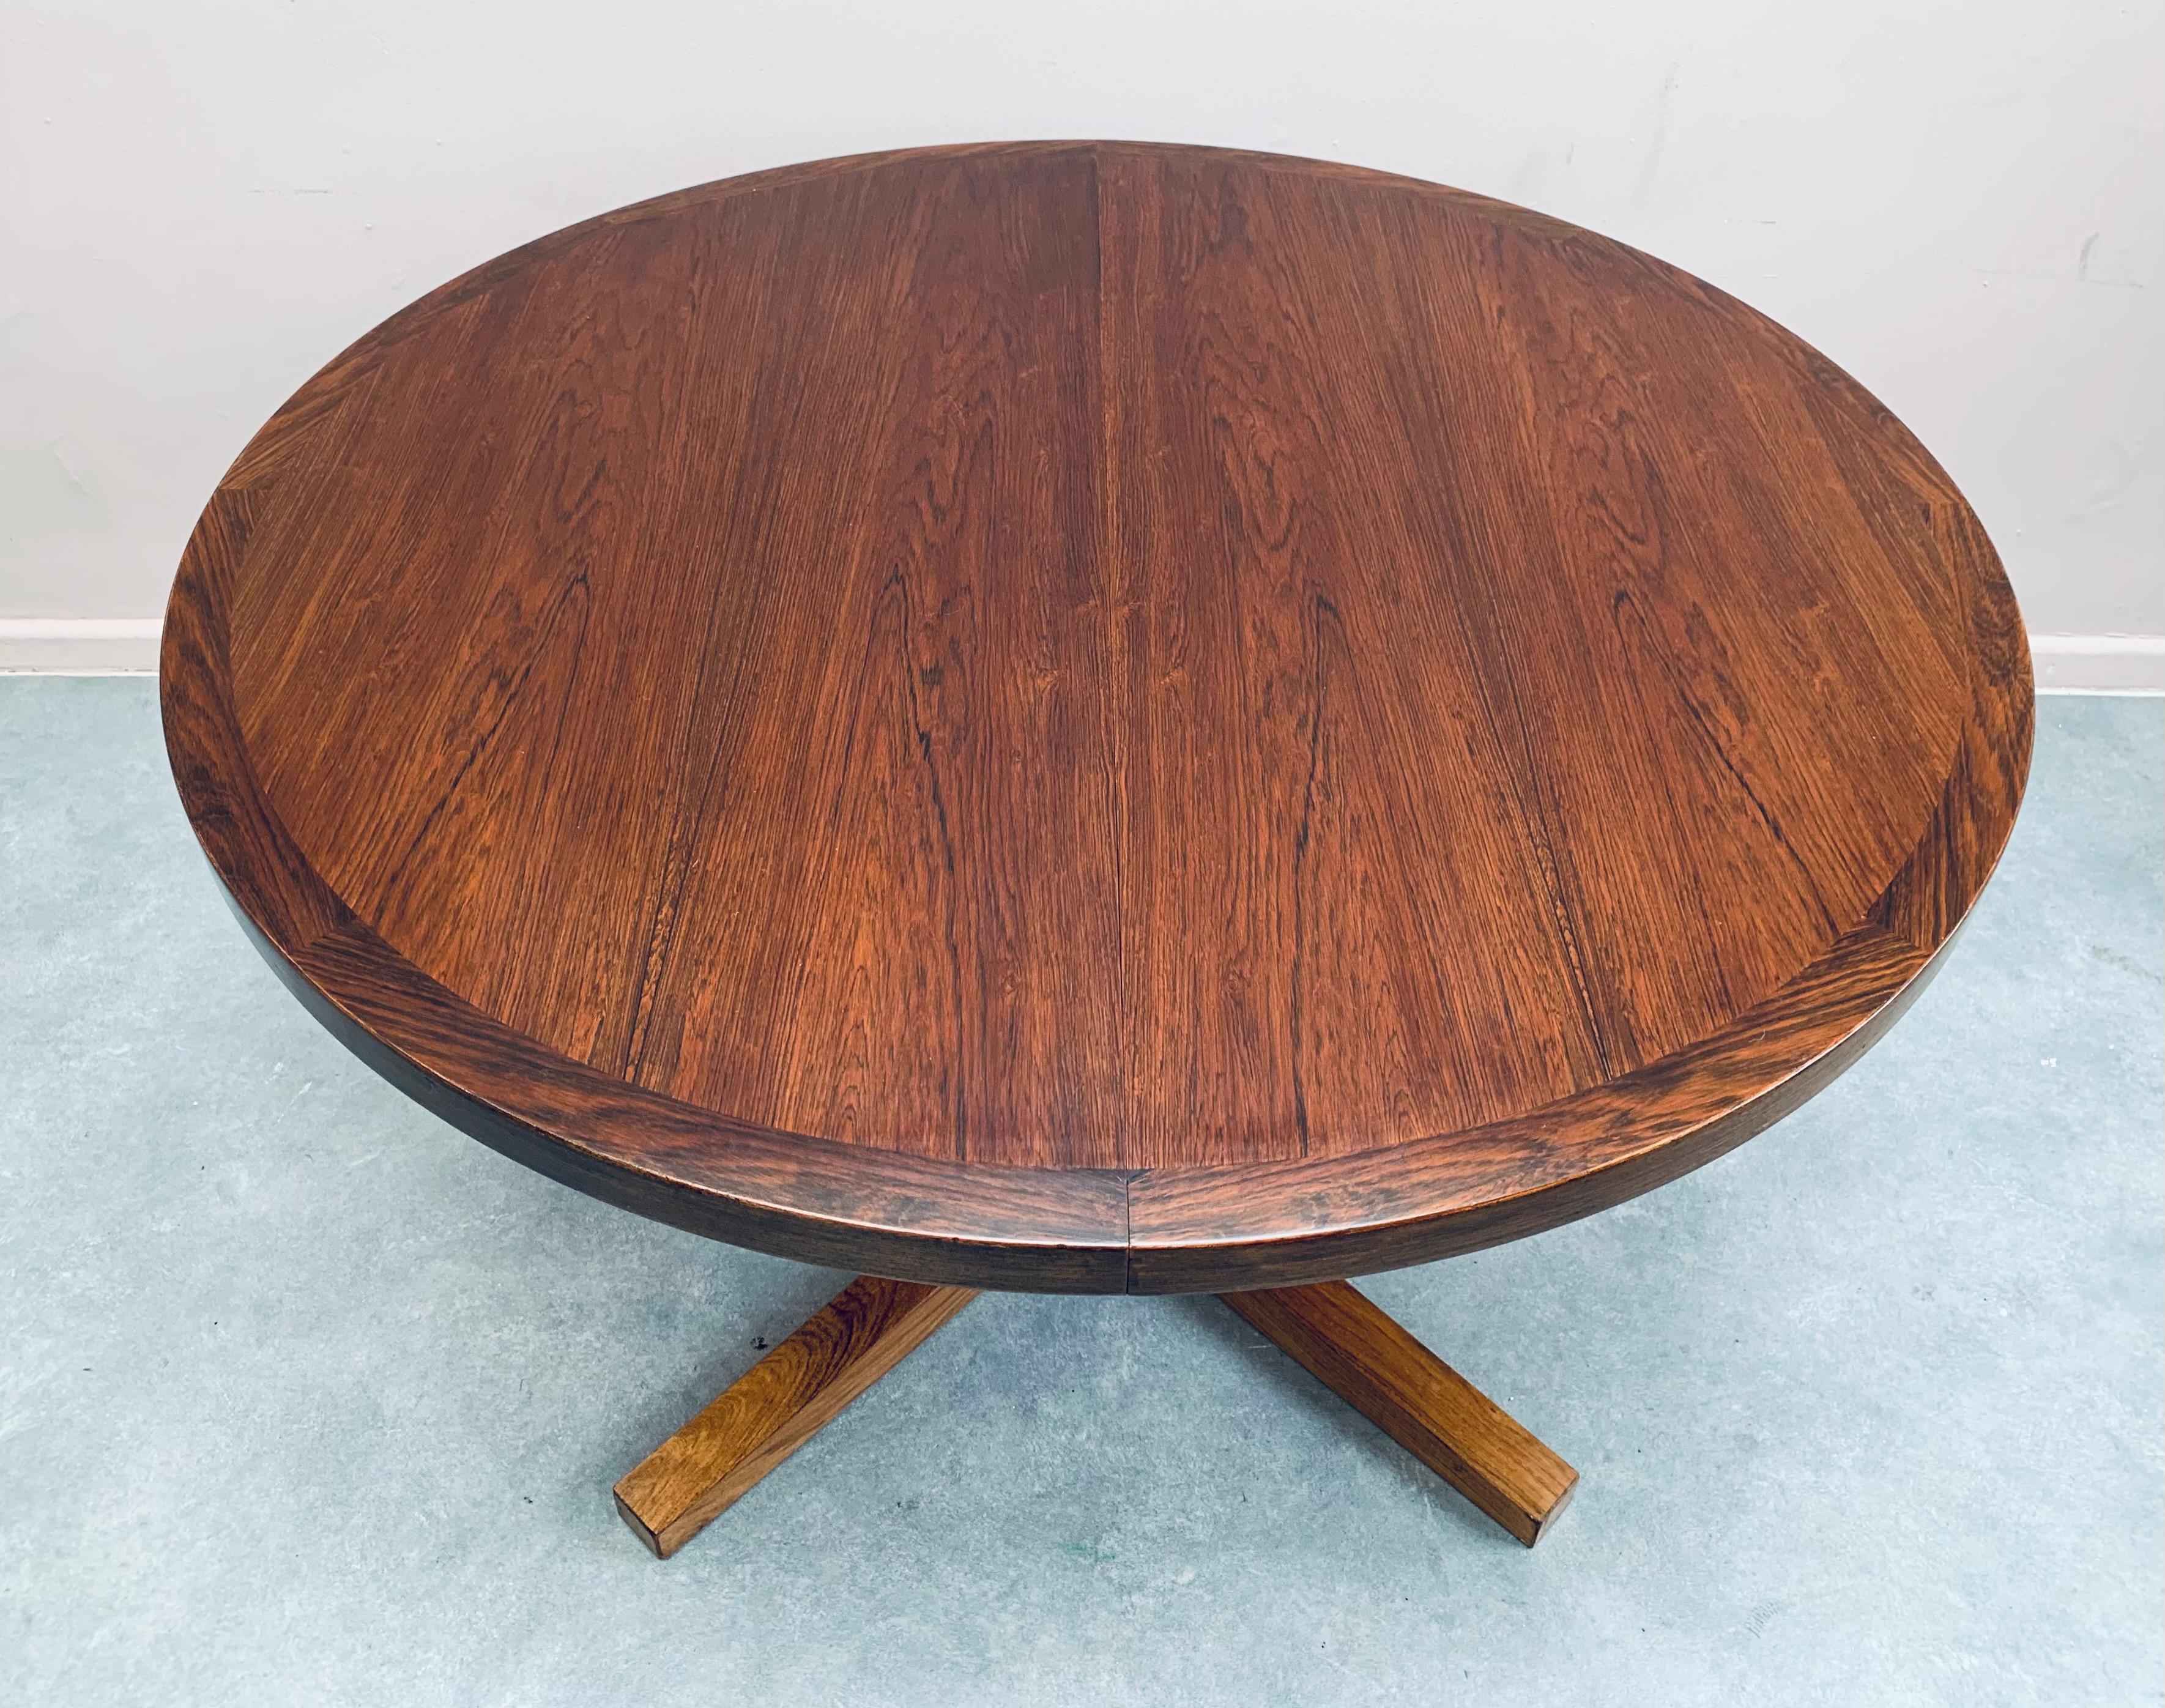 A stunning 1960s Rosewood pedestal dining table with a wonderful deep grain patina. Made in Denmark and designed by John Mortensen for Heltborg Mobler. The table sits on a central pedestal base with two independent extension leaves which require